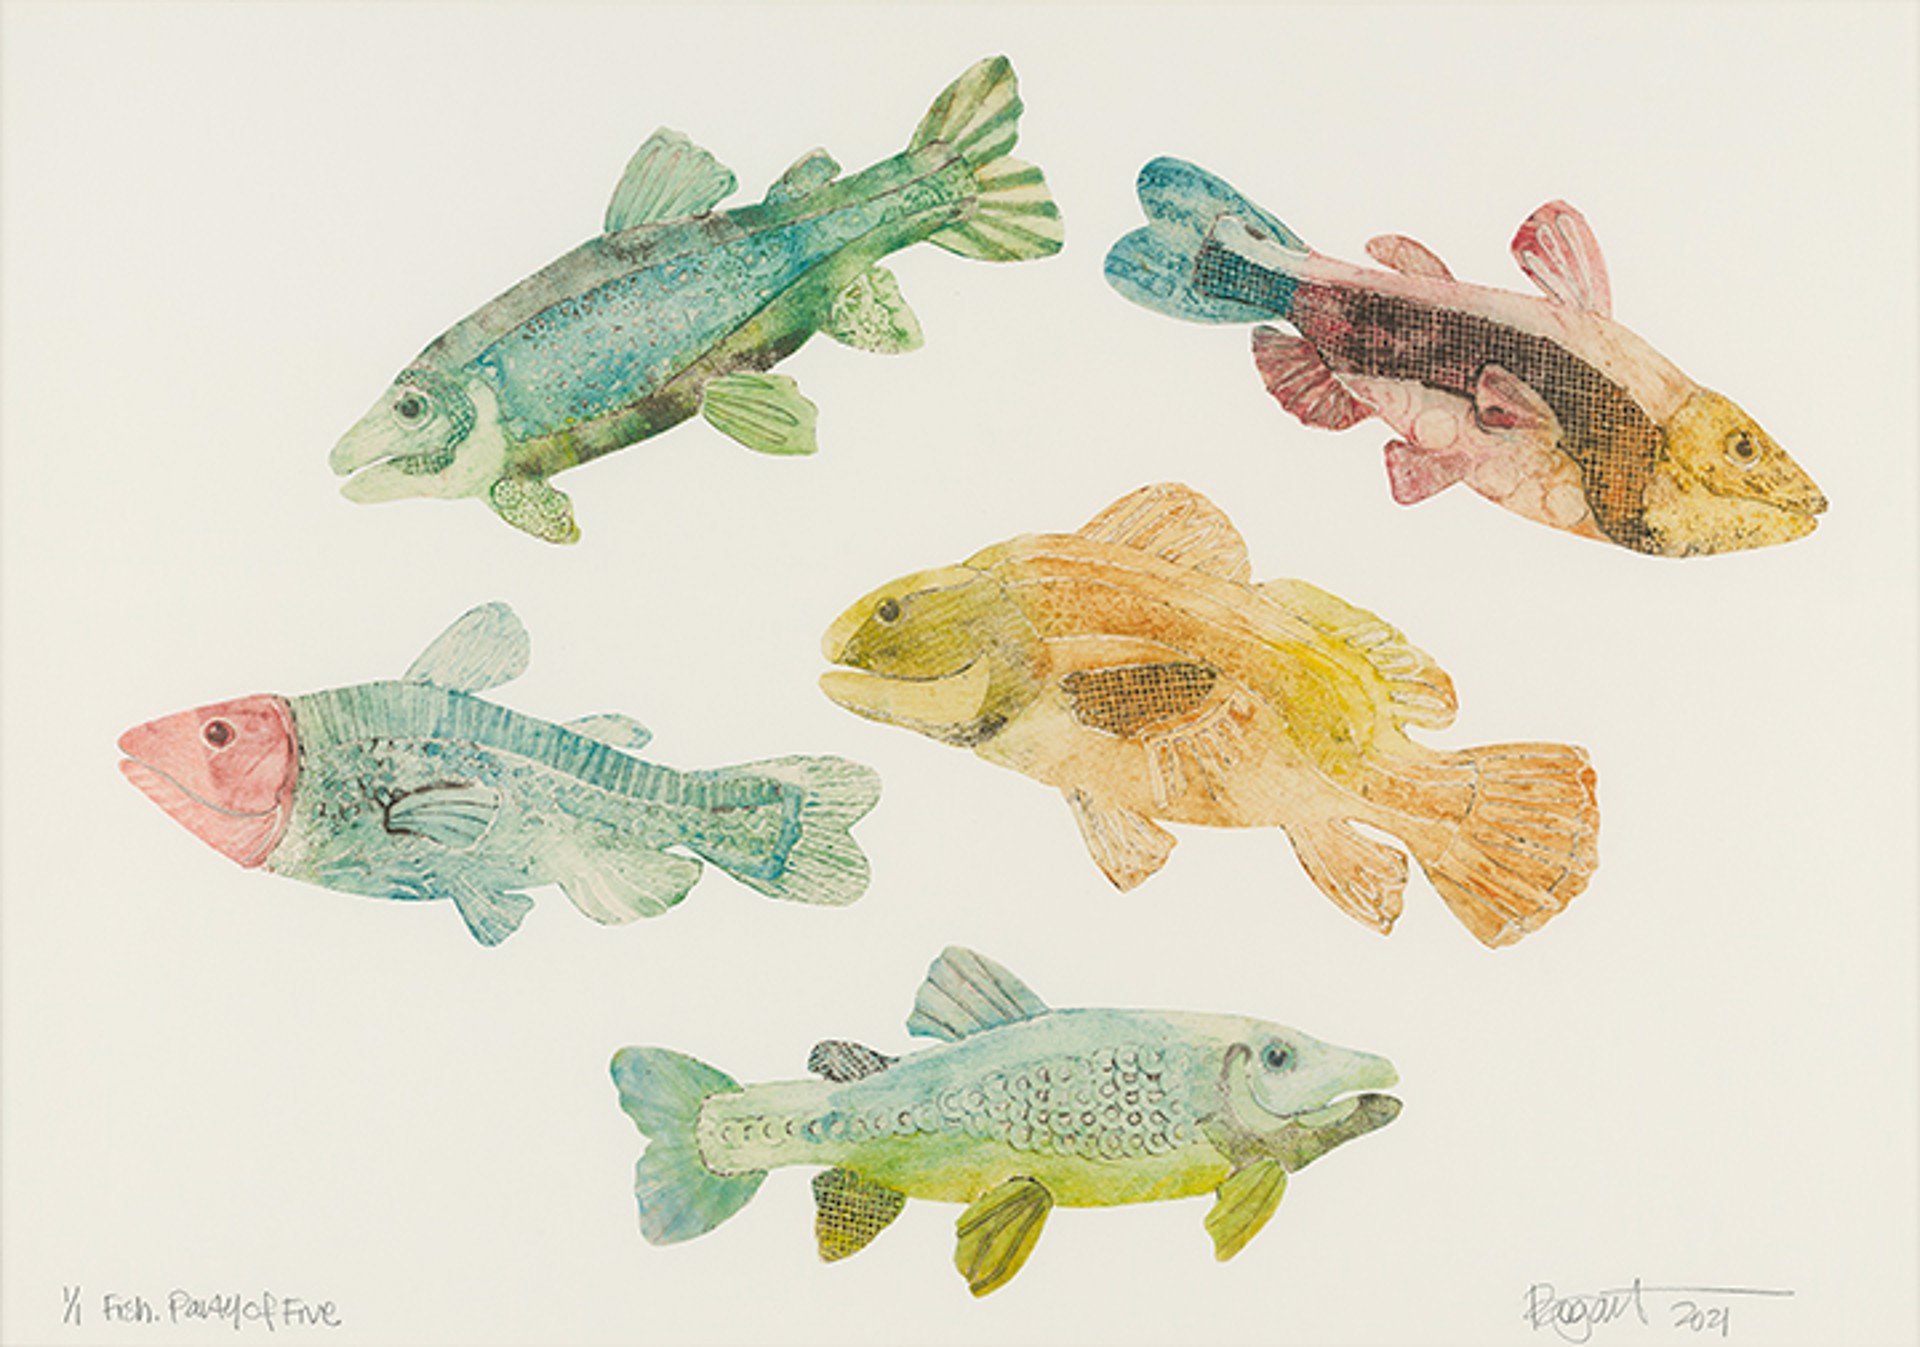 Fish Party of Five by Brenda Bogart - Prints